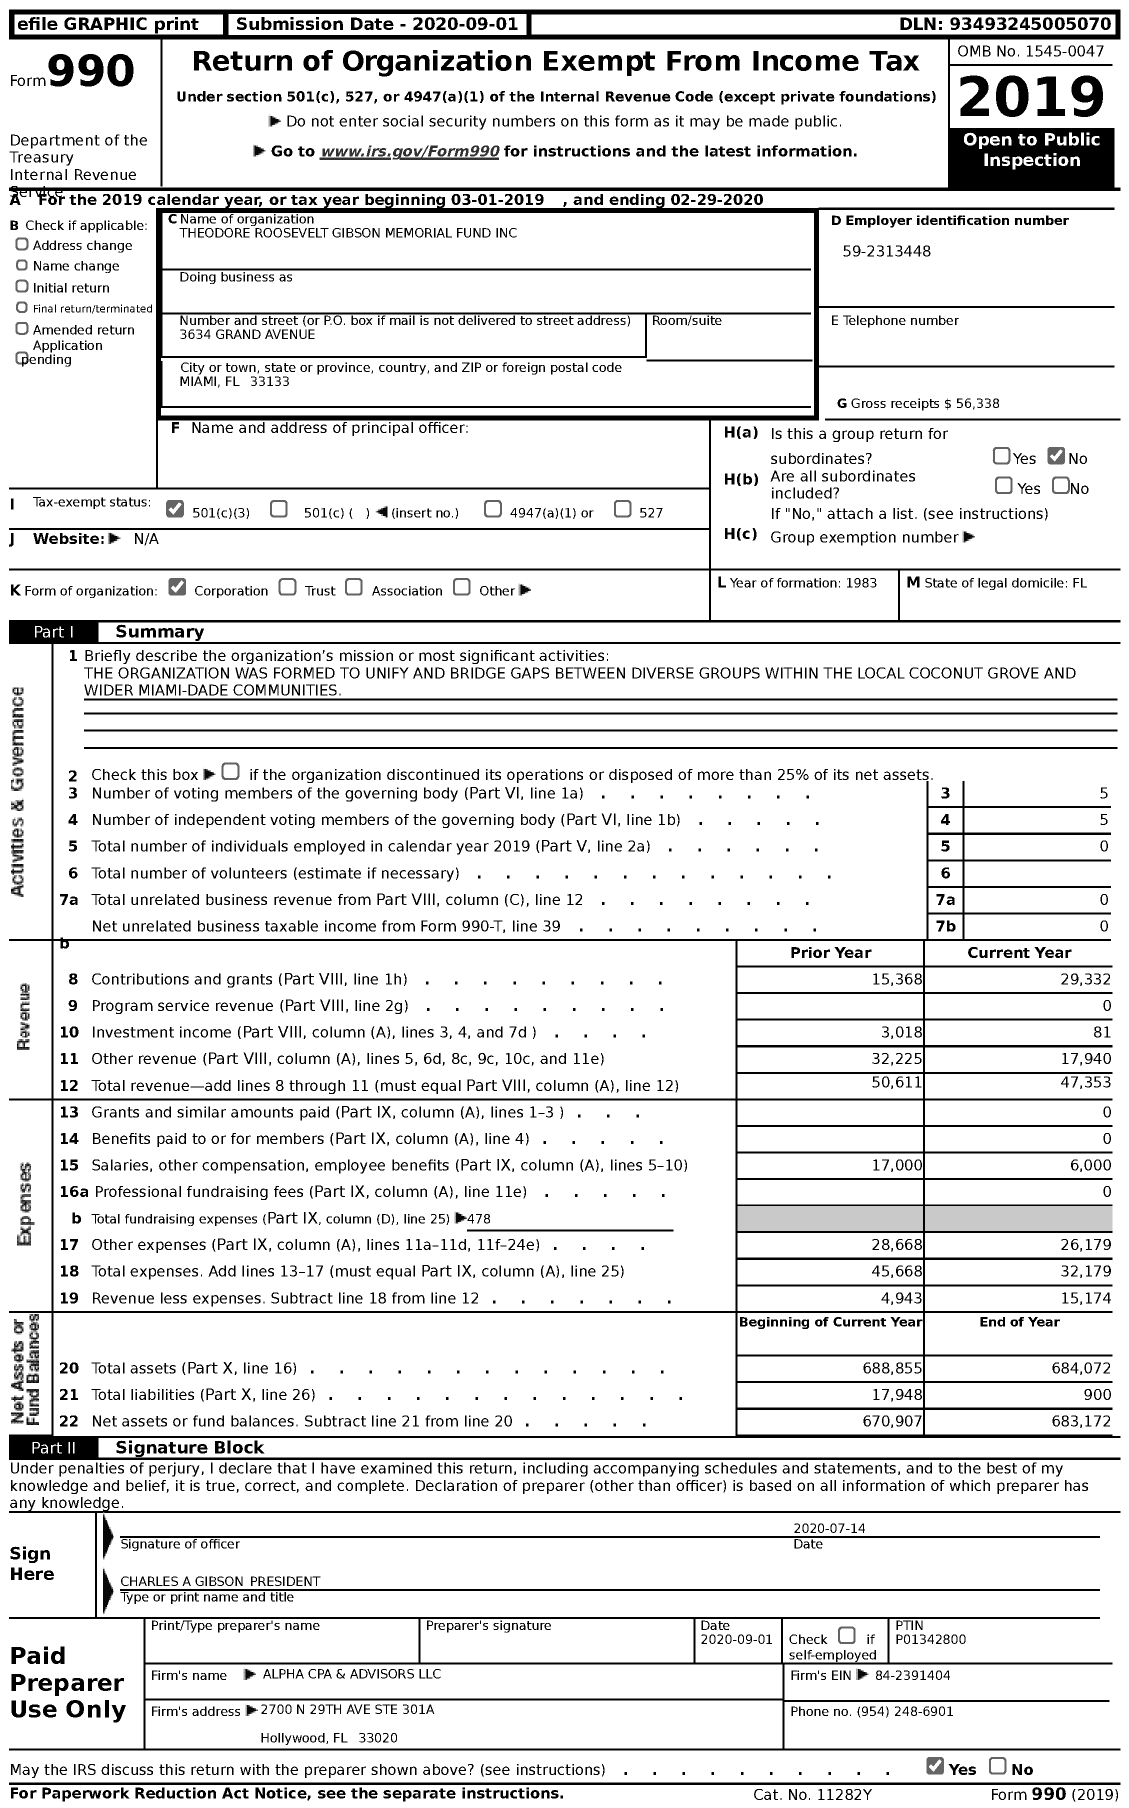 Image of first page of 2019 Form 990 for Theodore Roosevelt Gibson Memorial Fund